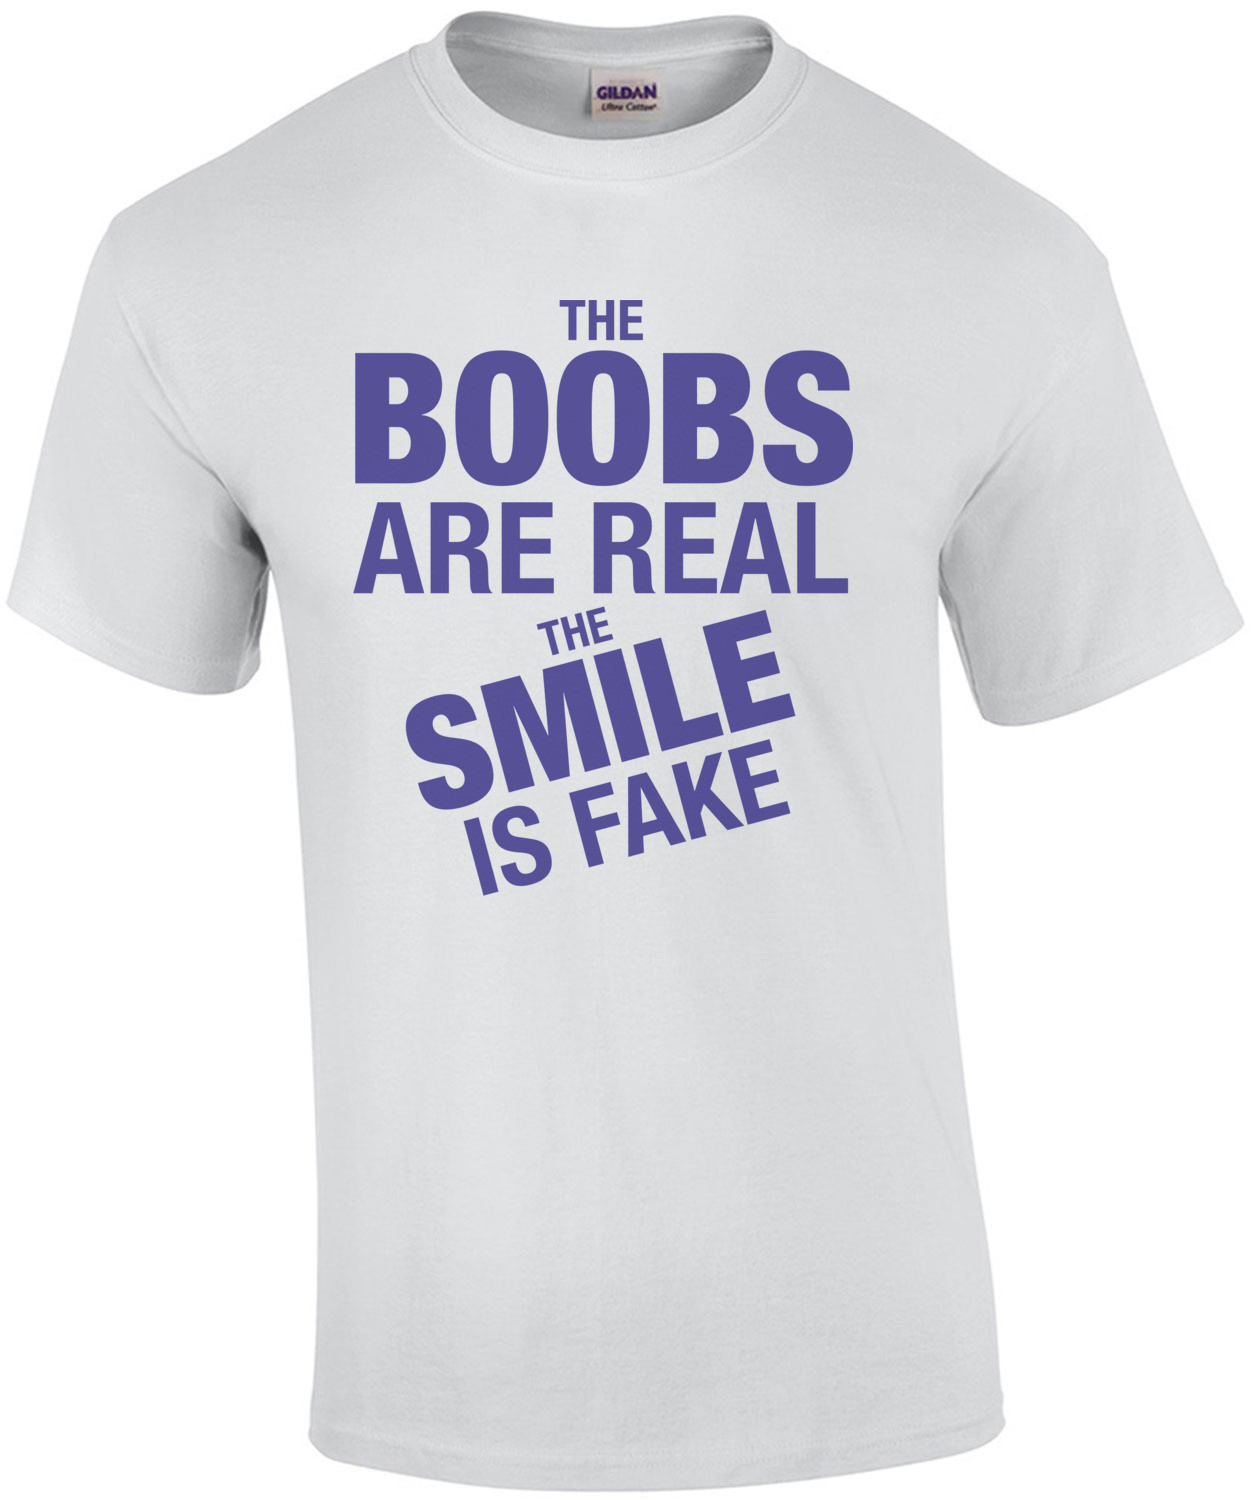 The Boobs Are Real, The Smile Is Fake T-Shirt